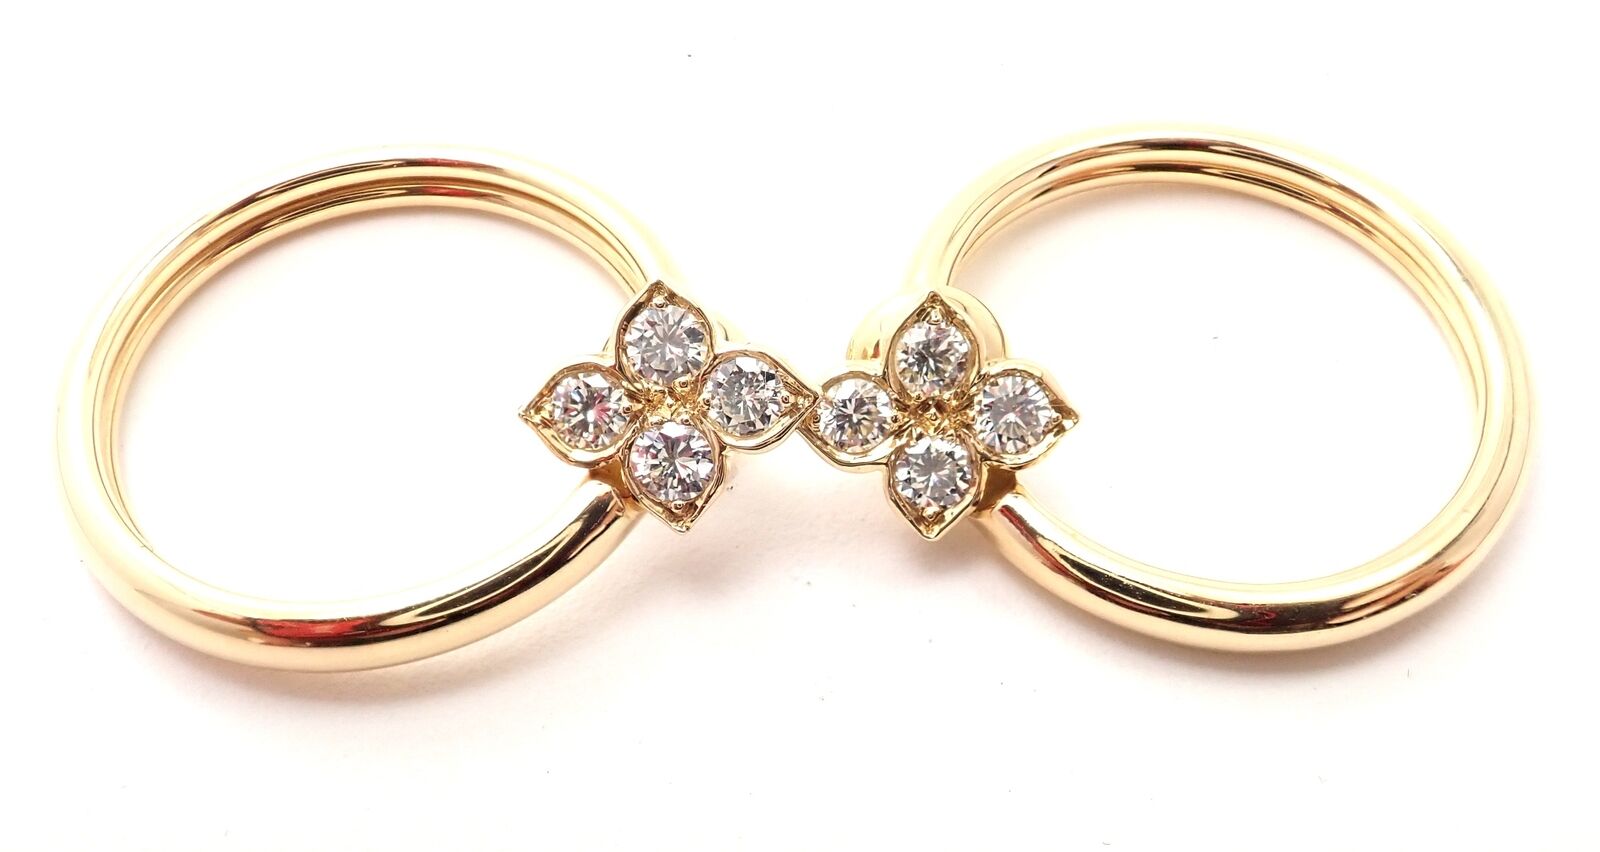 Cartier Jewelry & Watches:Fine Jewelry:Earrings Authentic! Cartier Hindu 18k Yellow Gold Diamond Floral Design Hoop Earrings